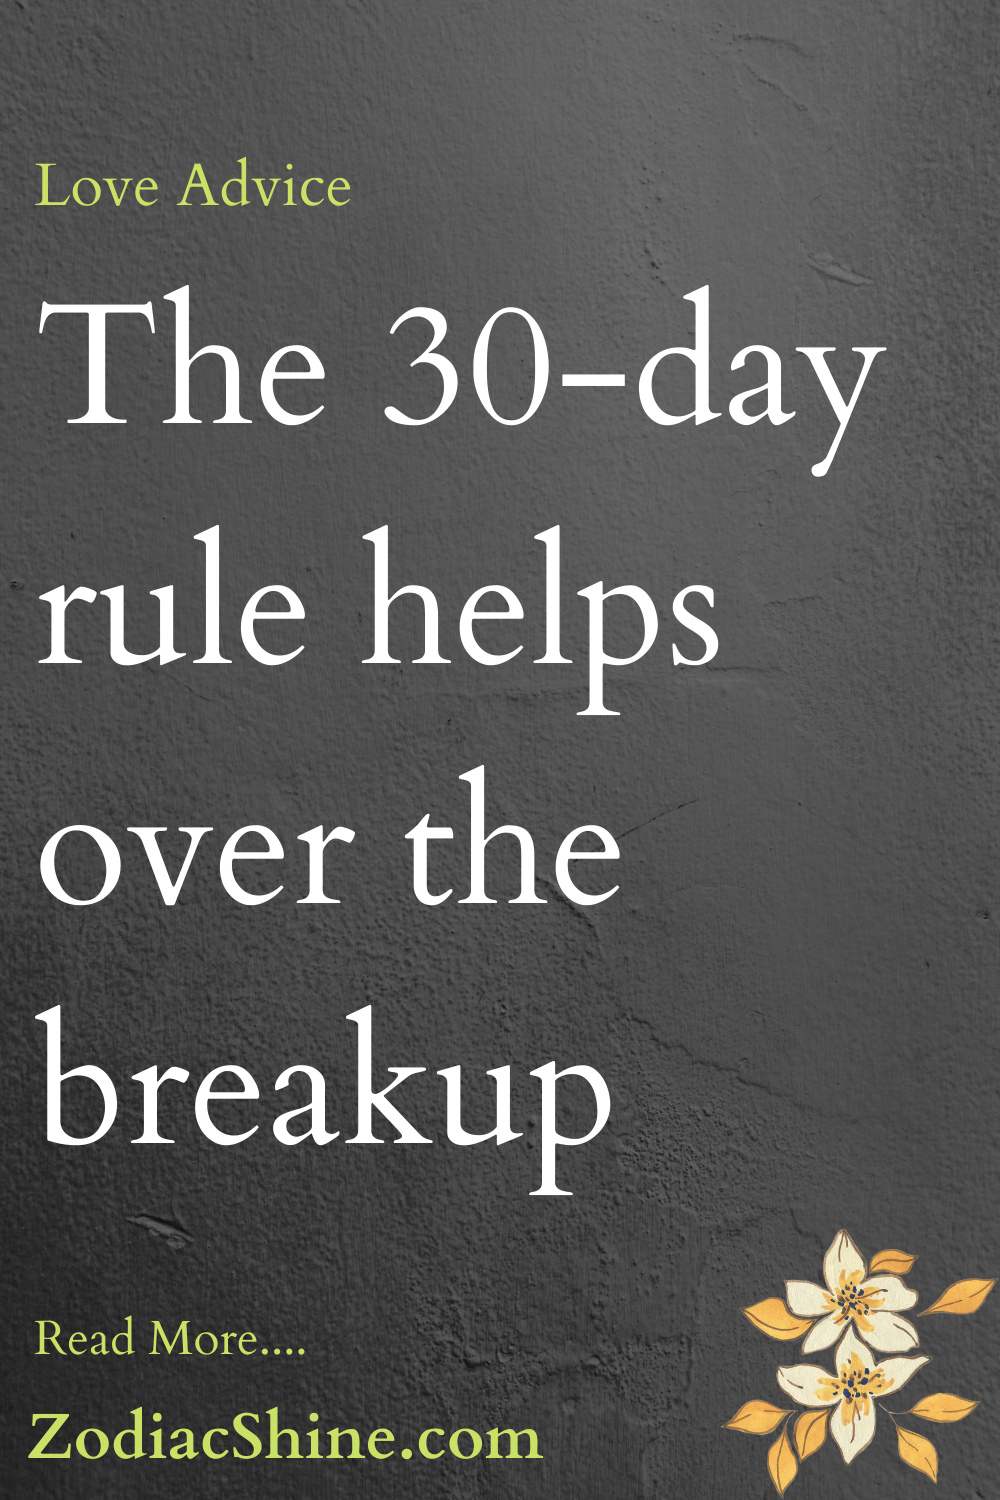 The 30-day rule helps over the breakup